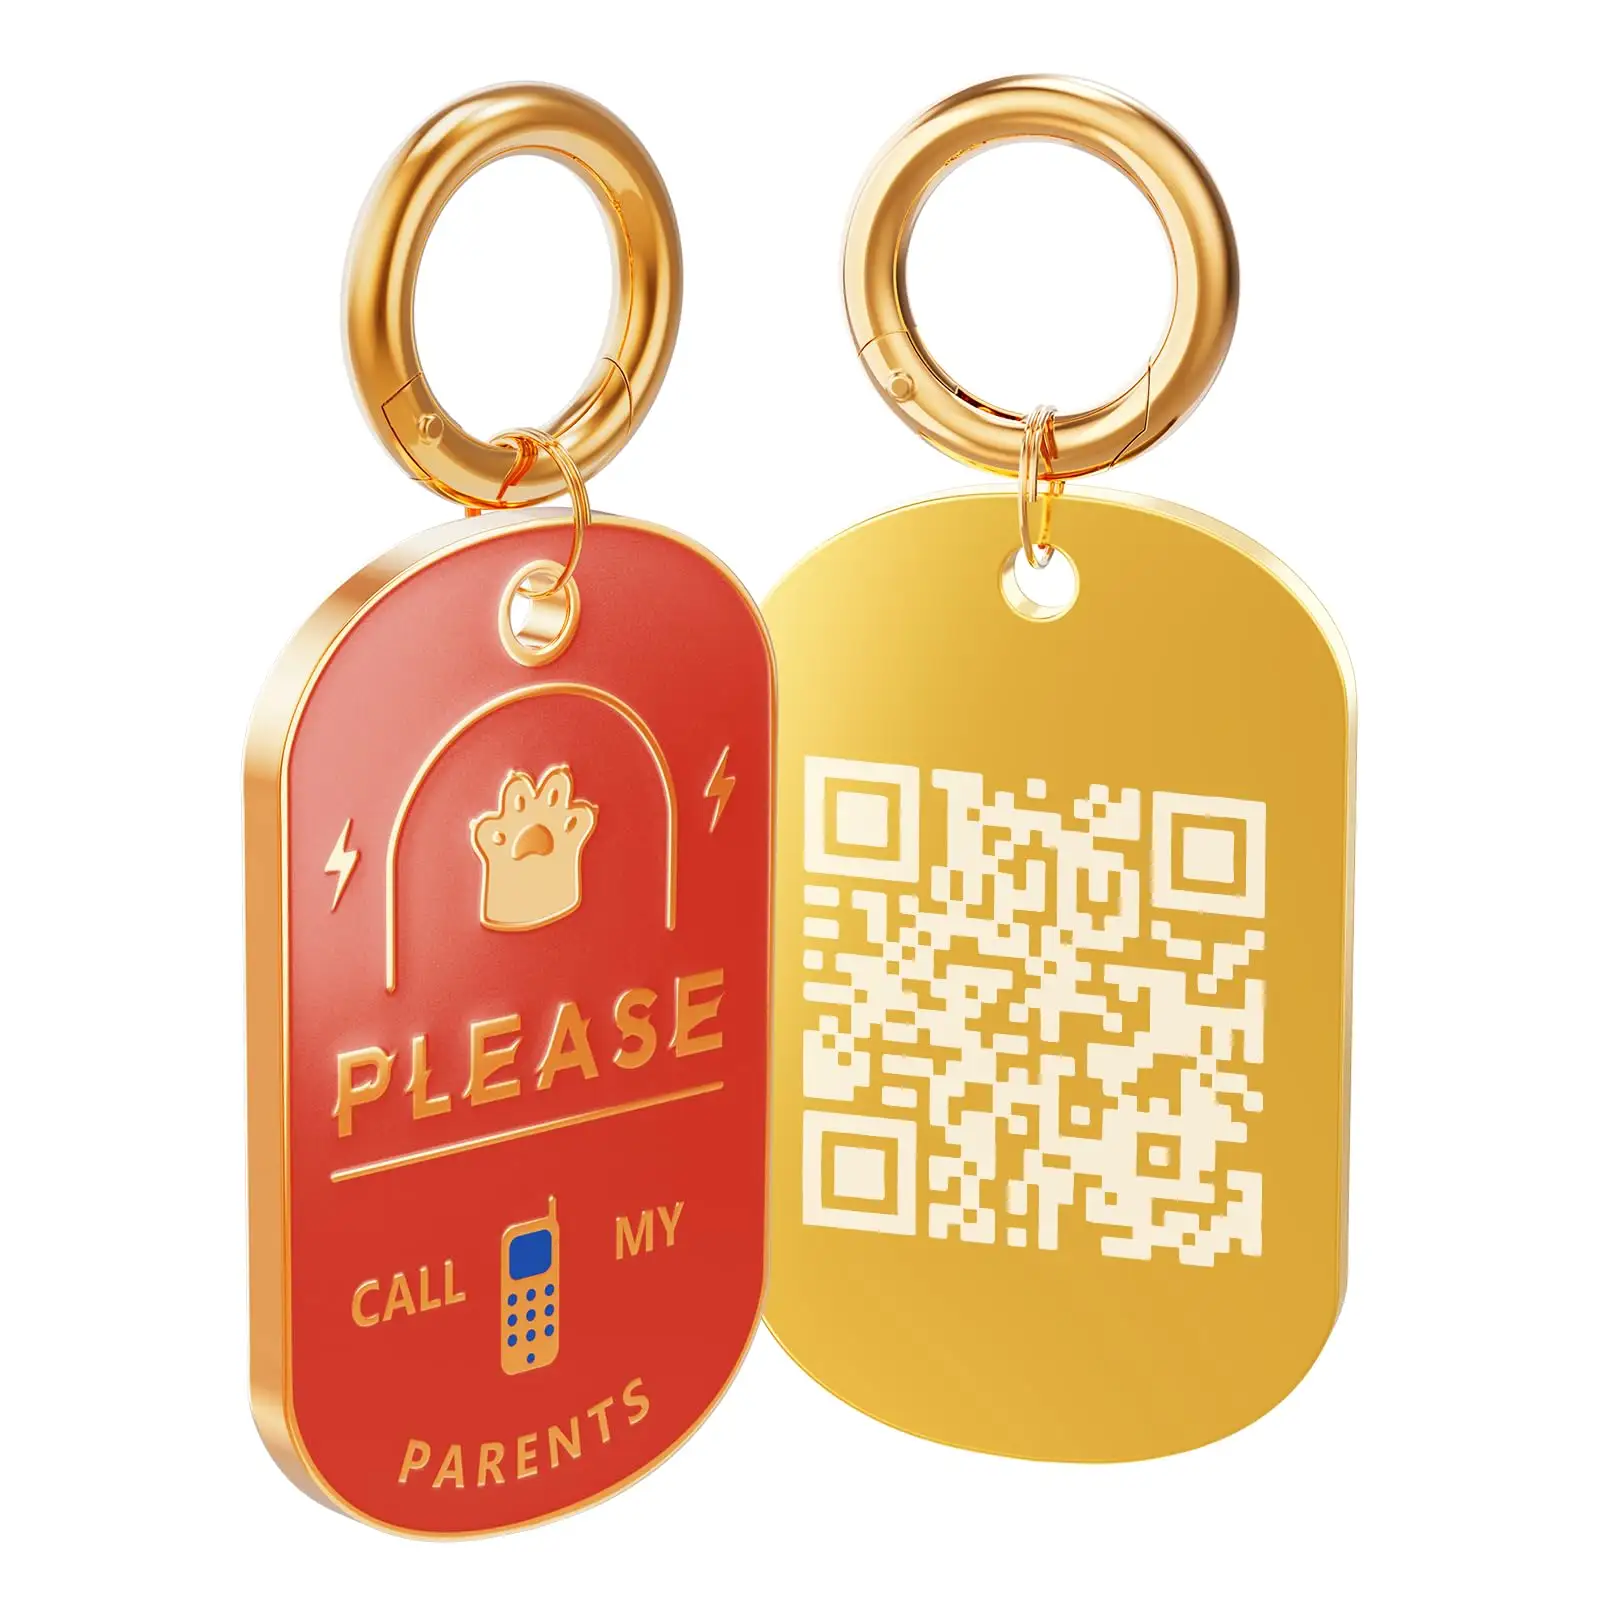 Personalized Dog Tags Scan Tag QR Code Receive Free Online Pet Profile Modifiable Dog Tag Engraved Custom logo pet